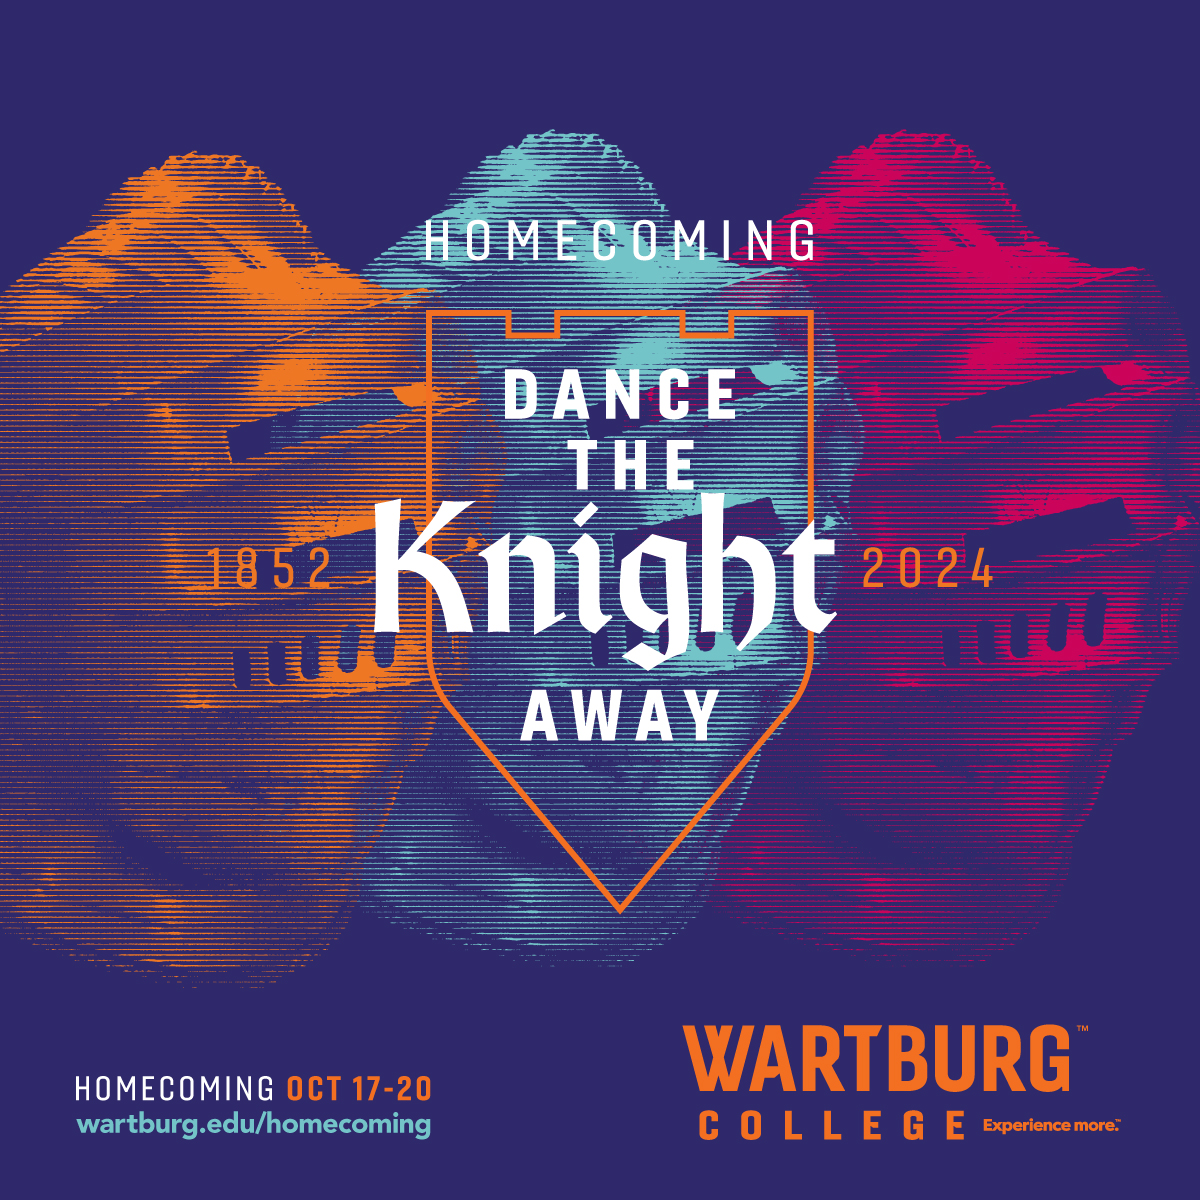 Homecoming & Family Weekend 2024: Dance the Knight Away, Oct. 17-20.